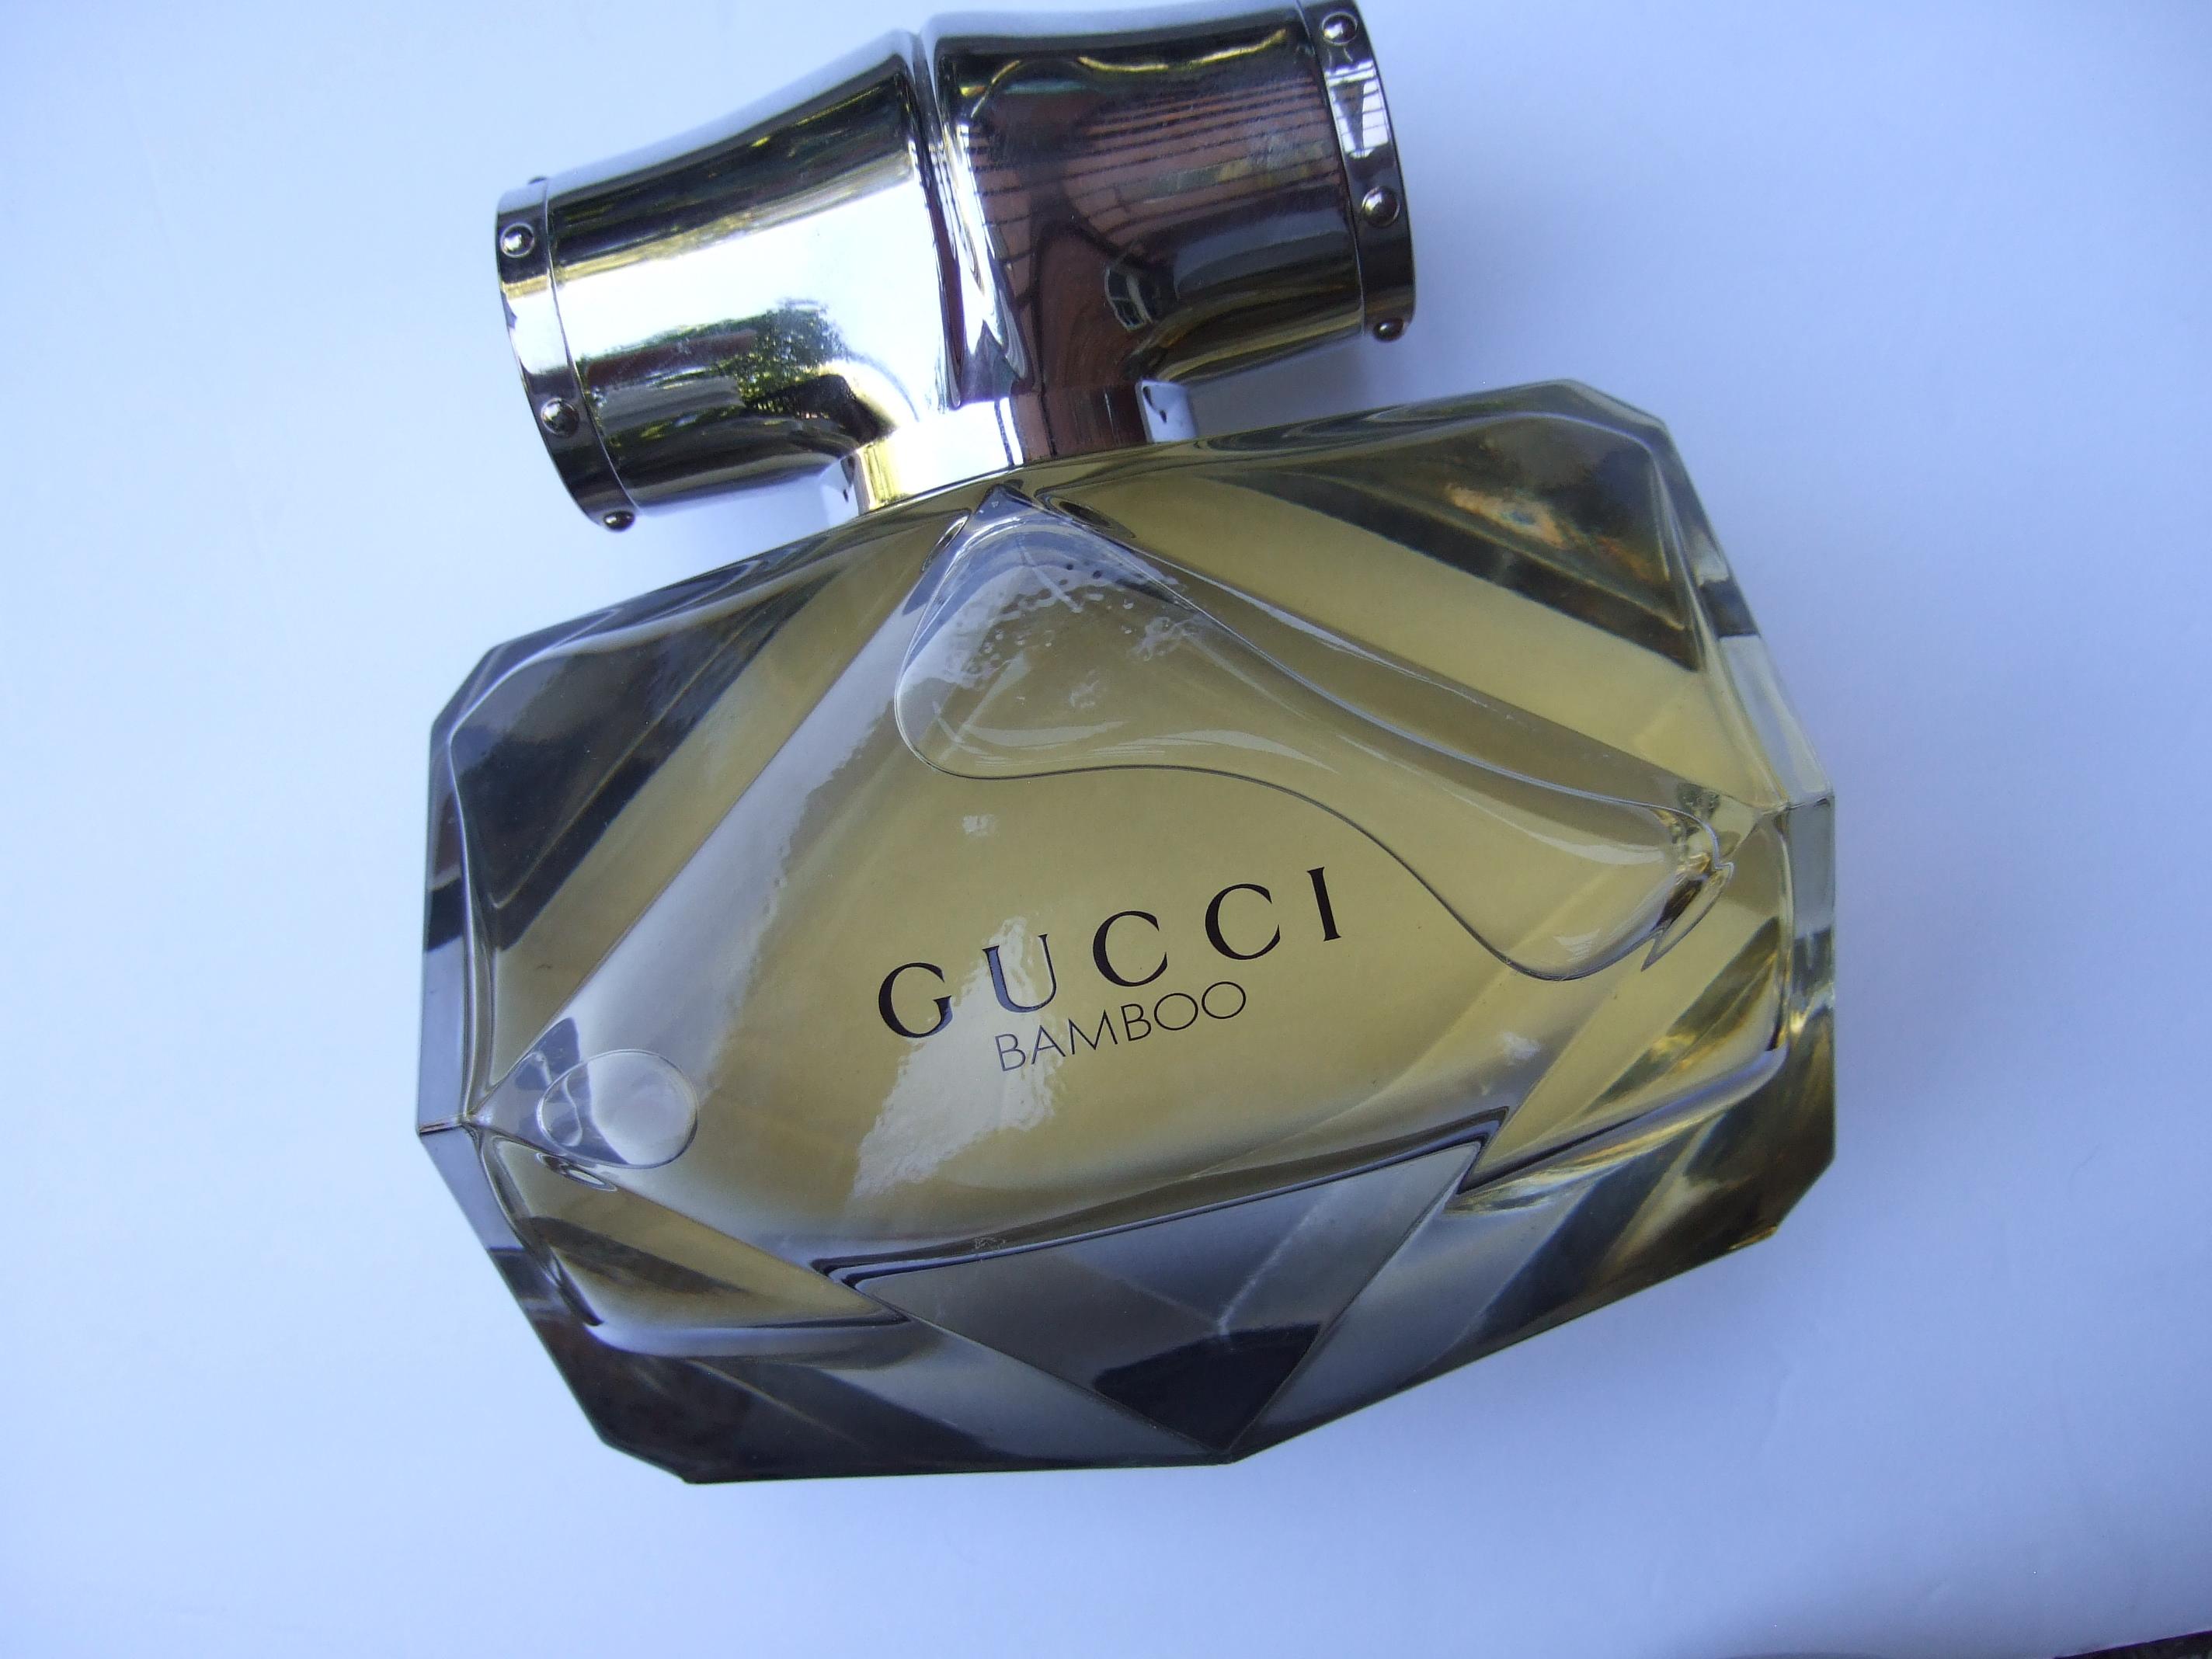 Gucci Bamboo Huge Glass Factice Faceted Display Dekorative Flasche c 21st c  im Angebot 3